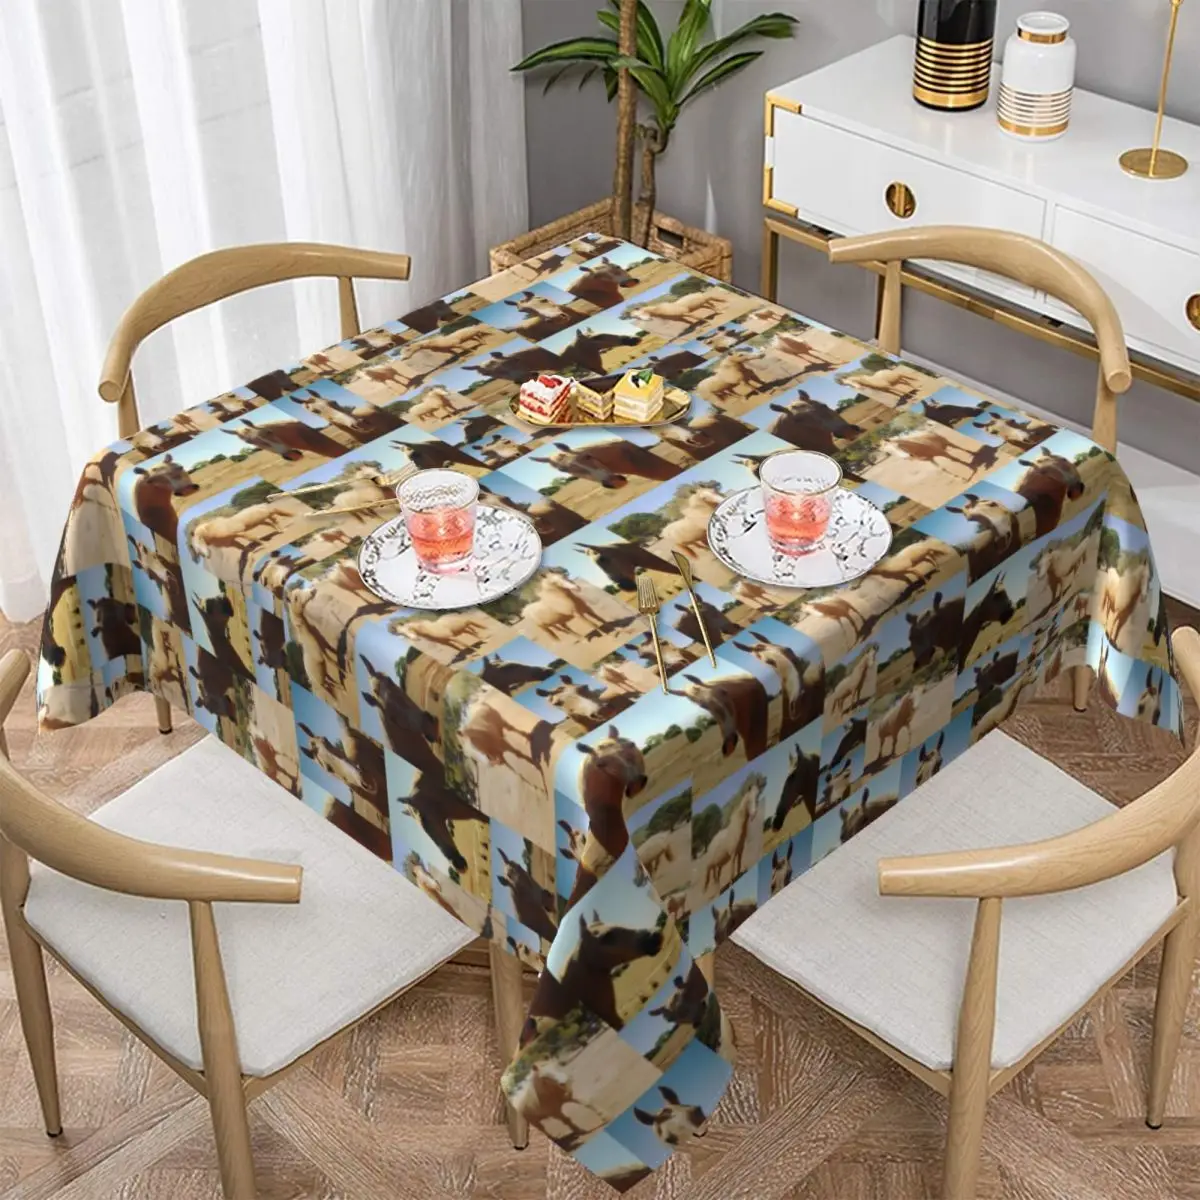 

Palomino Horse Tablecloth Farm Animal Print Square Print Table Cover Party Wholesale Protection Polyester Table Cloth